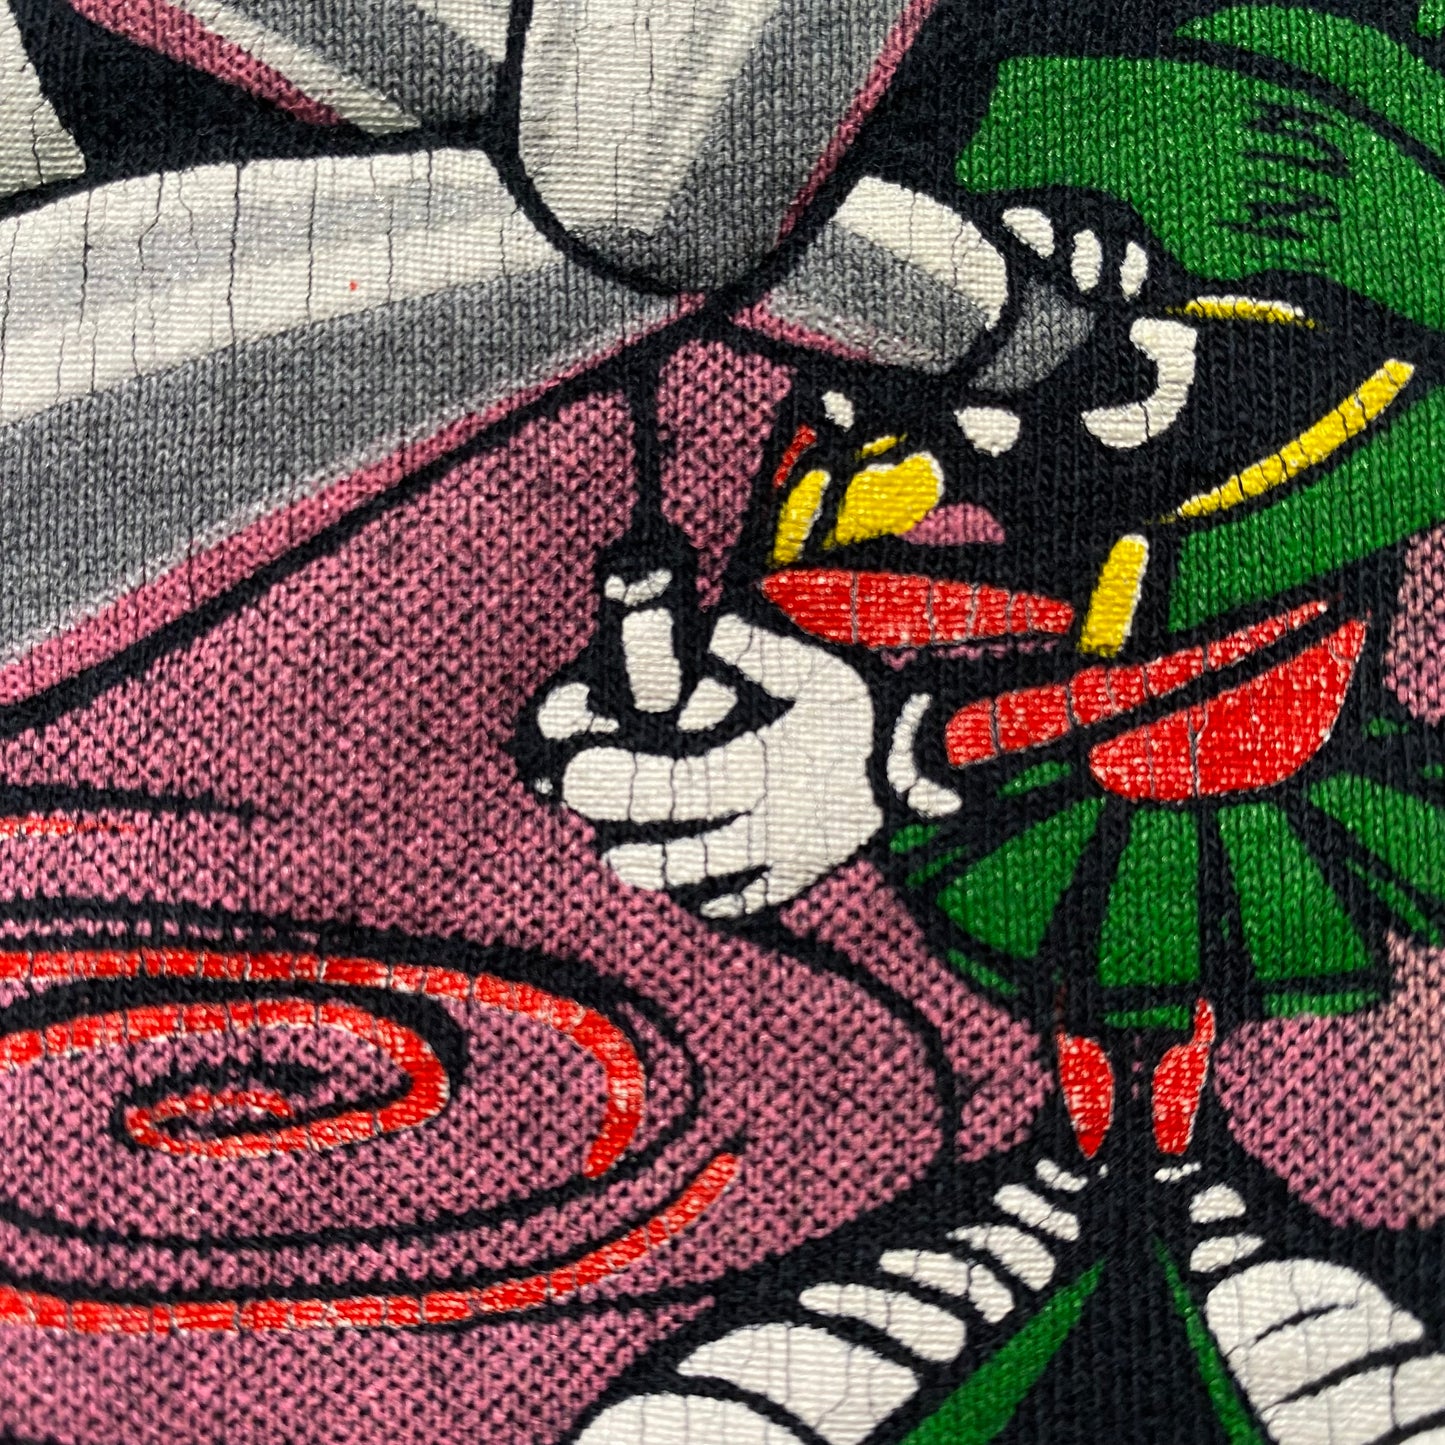 Marvin The Martian "The Eyes Of Mars " Shirt - L